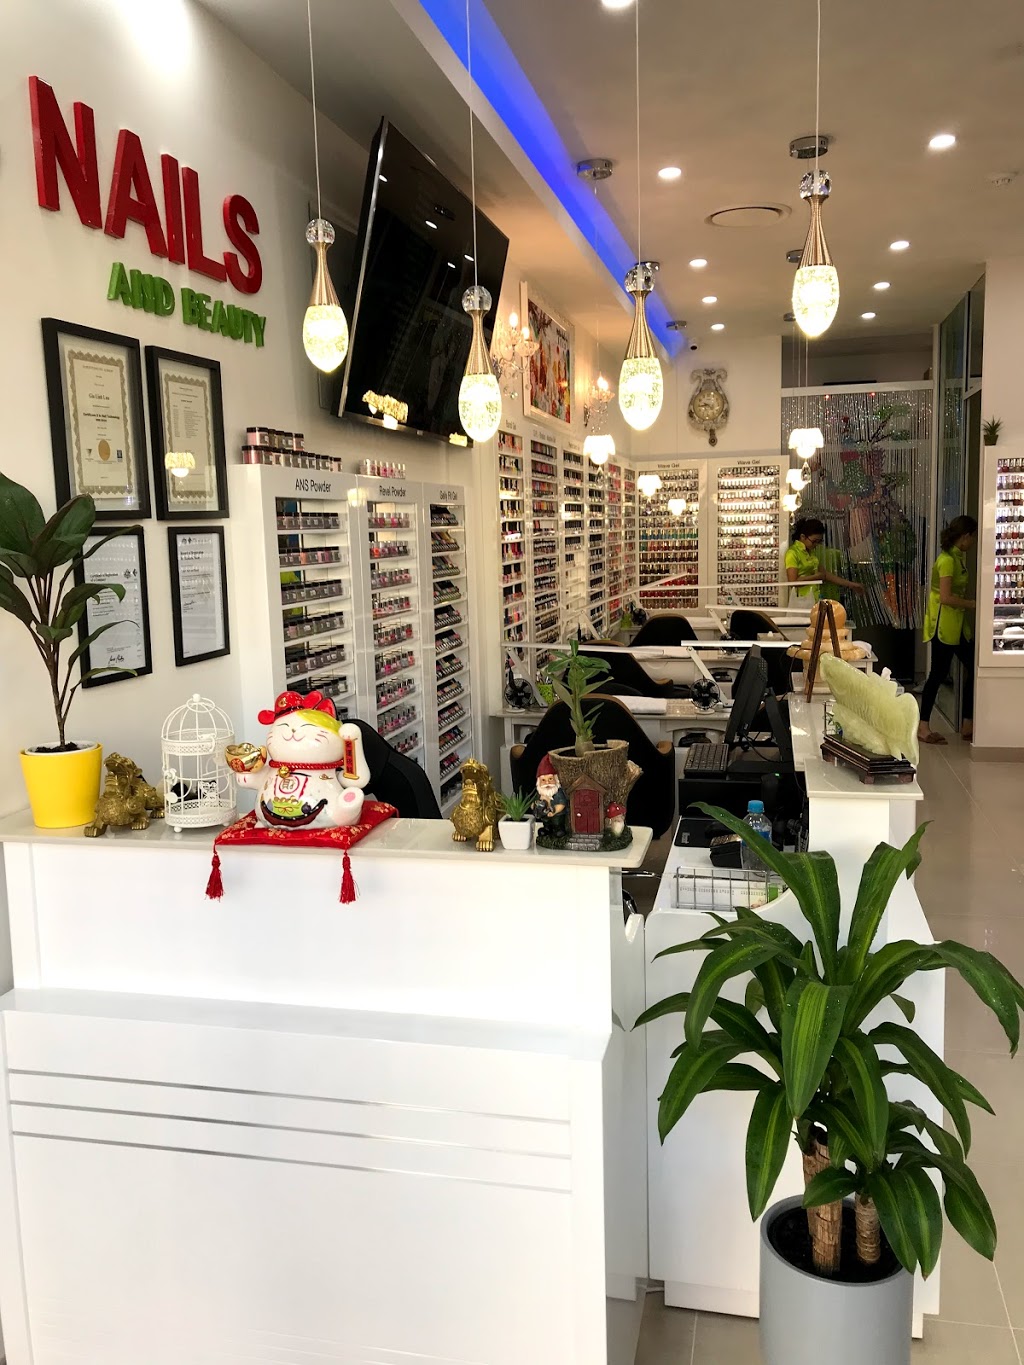 Linh’s nails and beauty | beauty salon | 190 Coogee Bay Rd, Coogee NSW 2034, Australia | 0296643228 OR +61 2 9664 3228